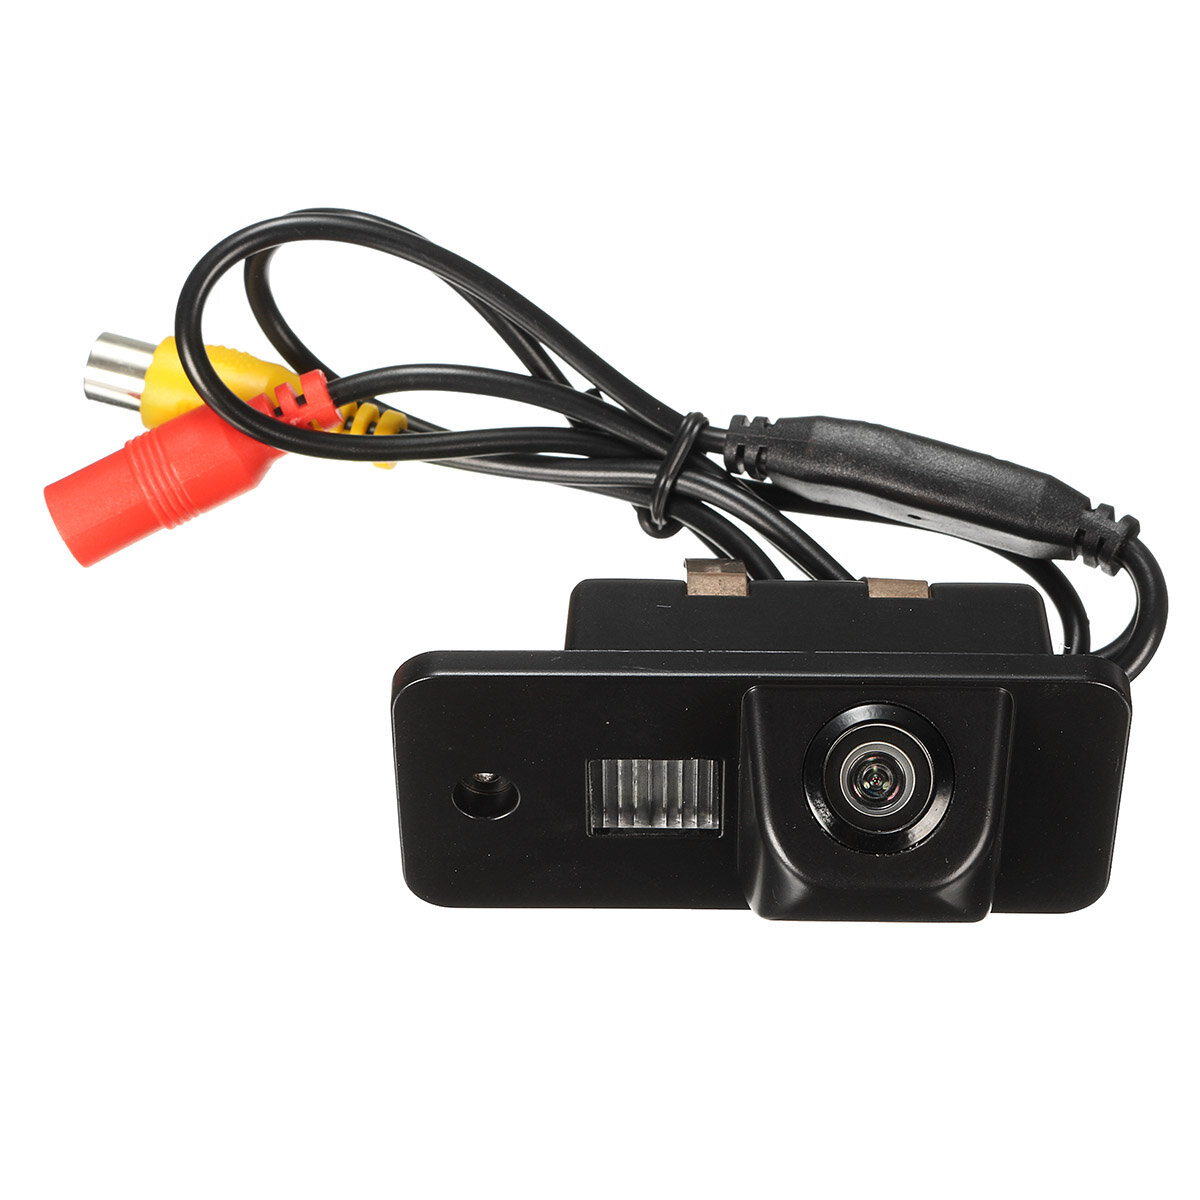 Hd waterproof reversing car rear view camera for audi a3 a4 a5 rs4